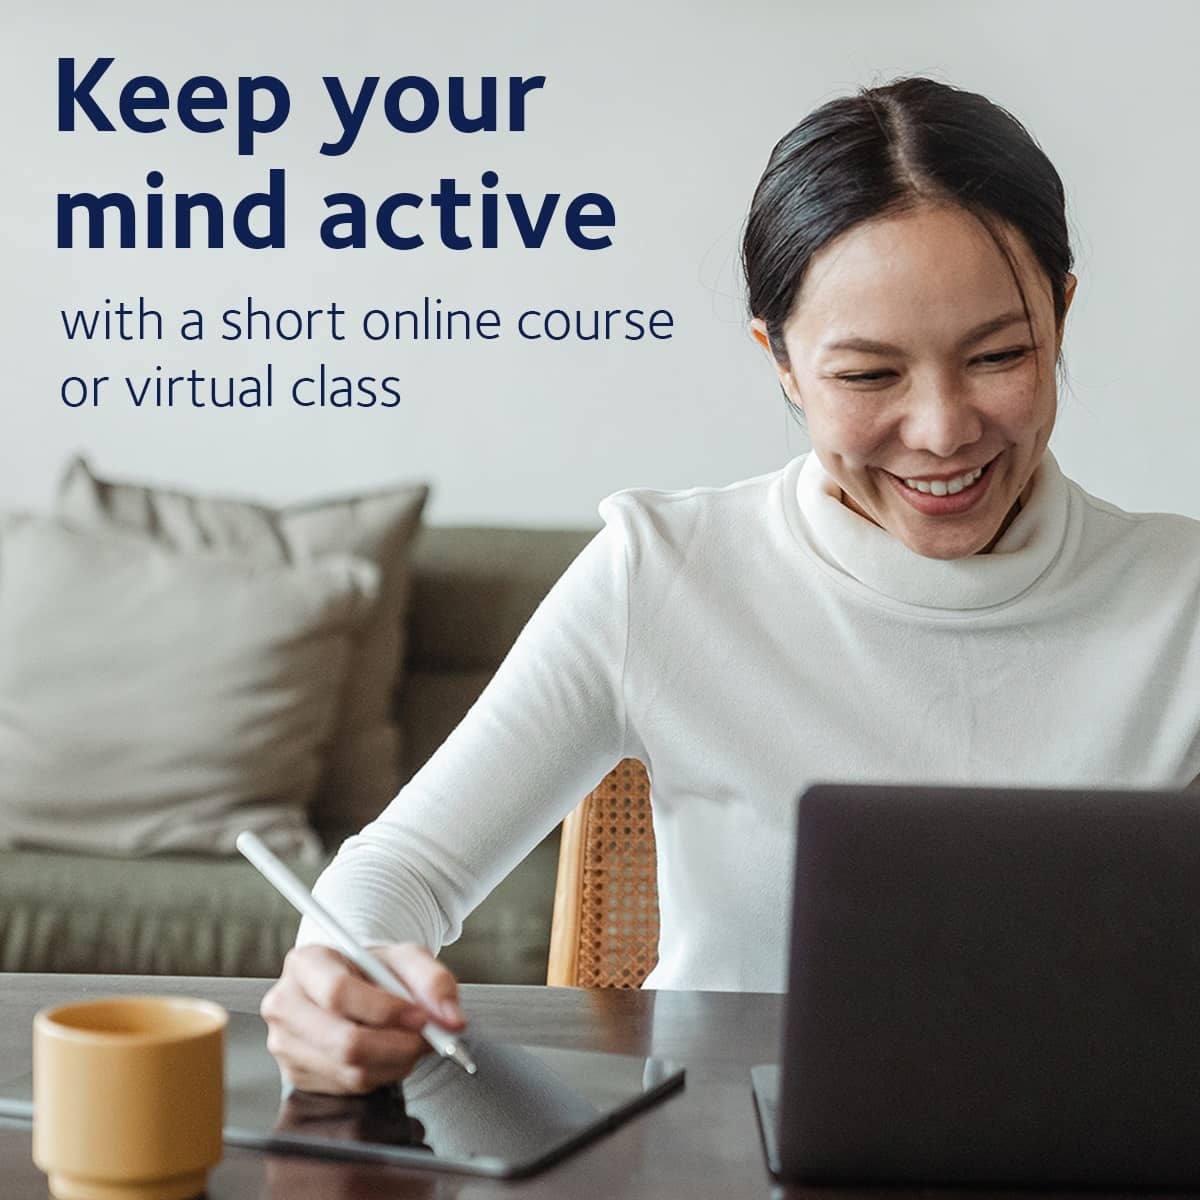 Keep your mind active - with a short online course or virtual class